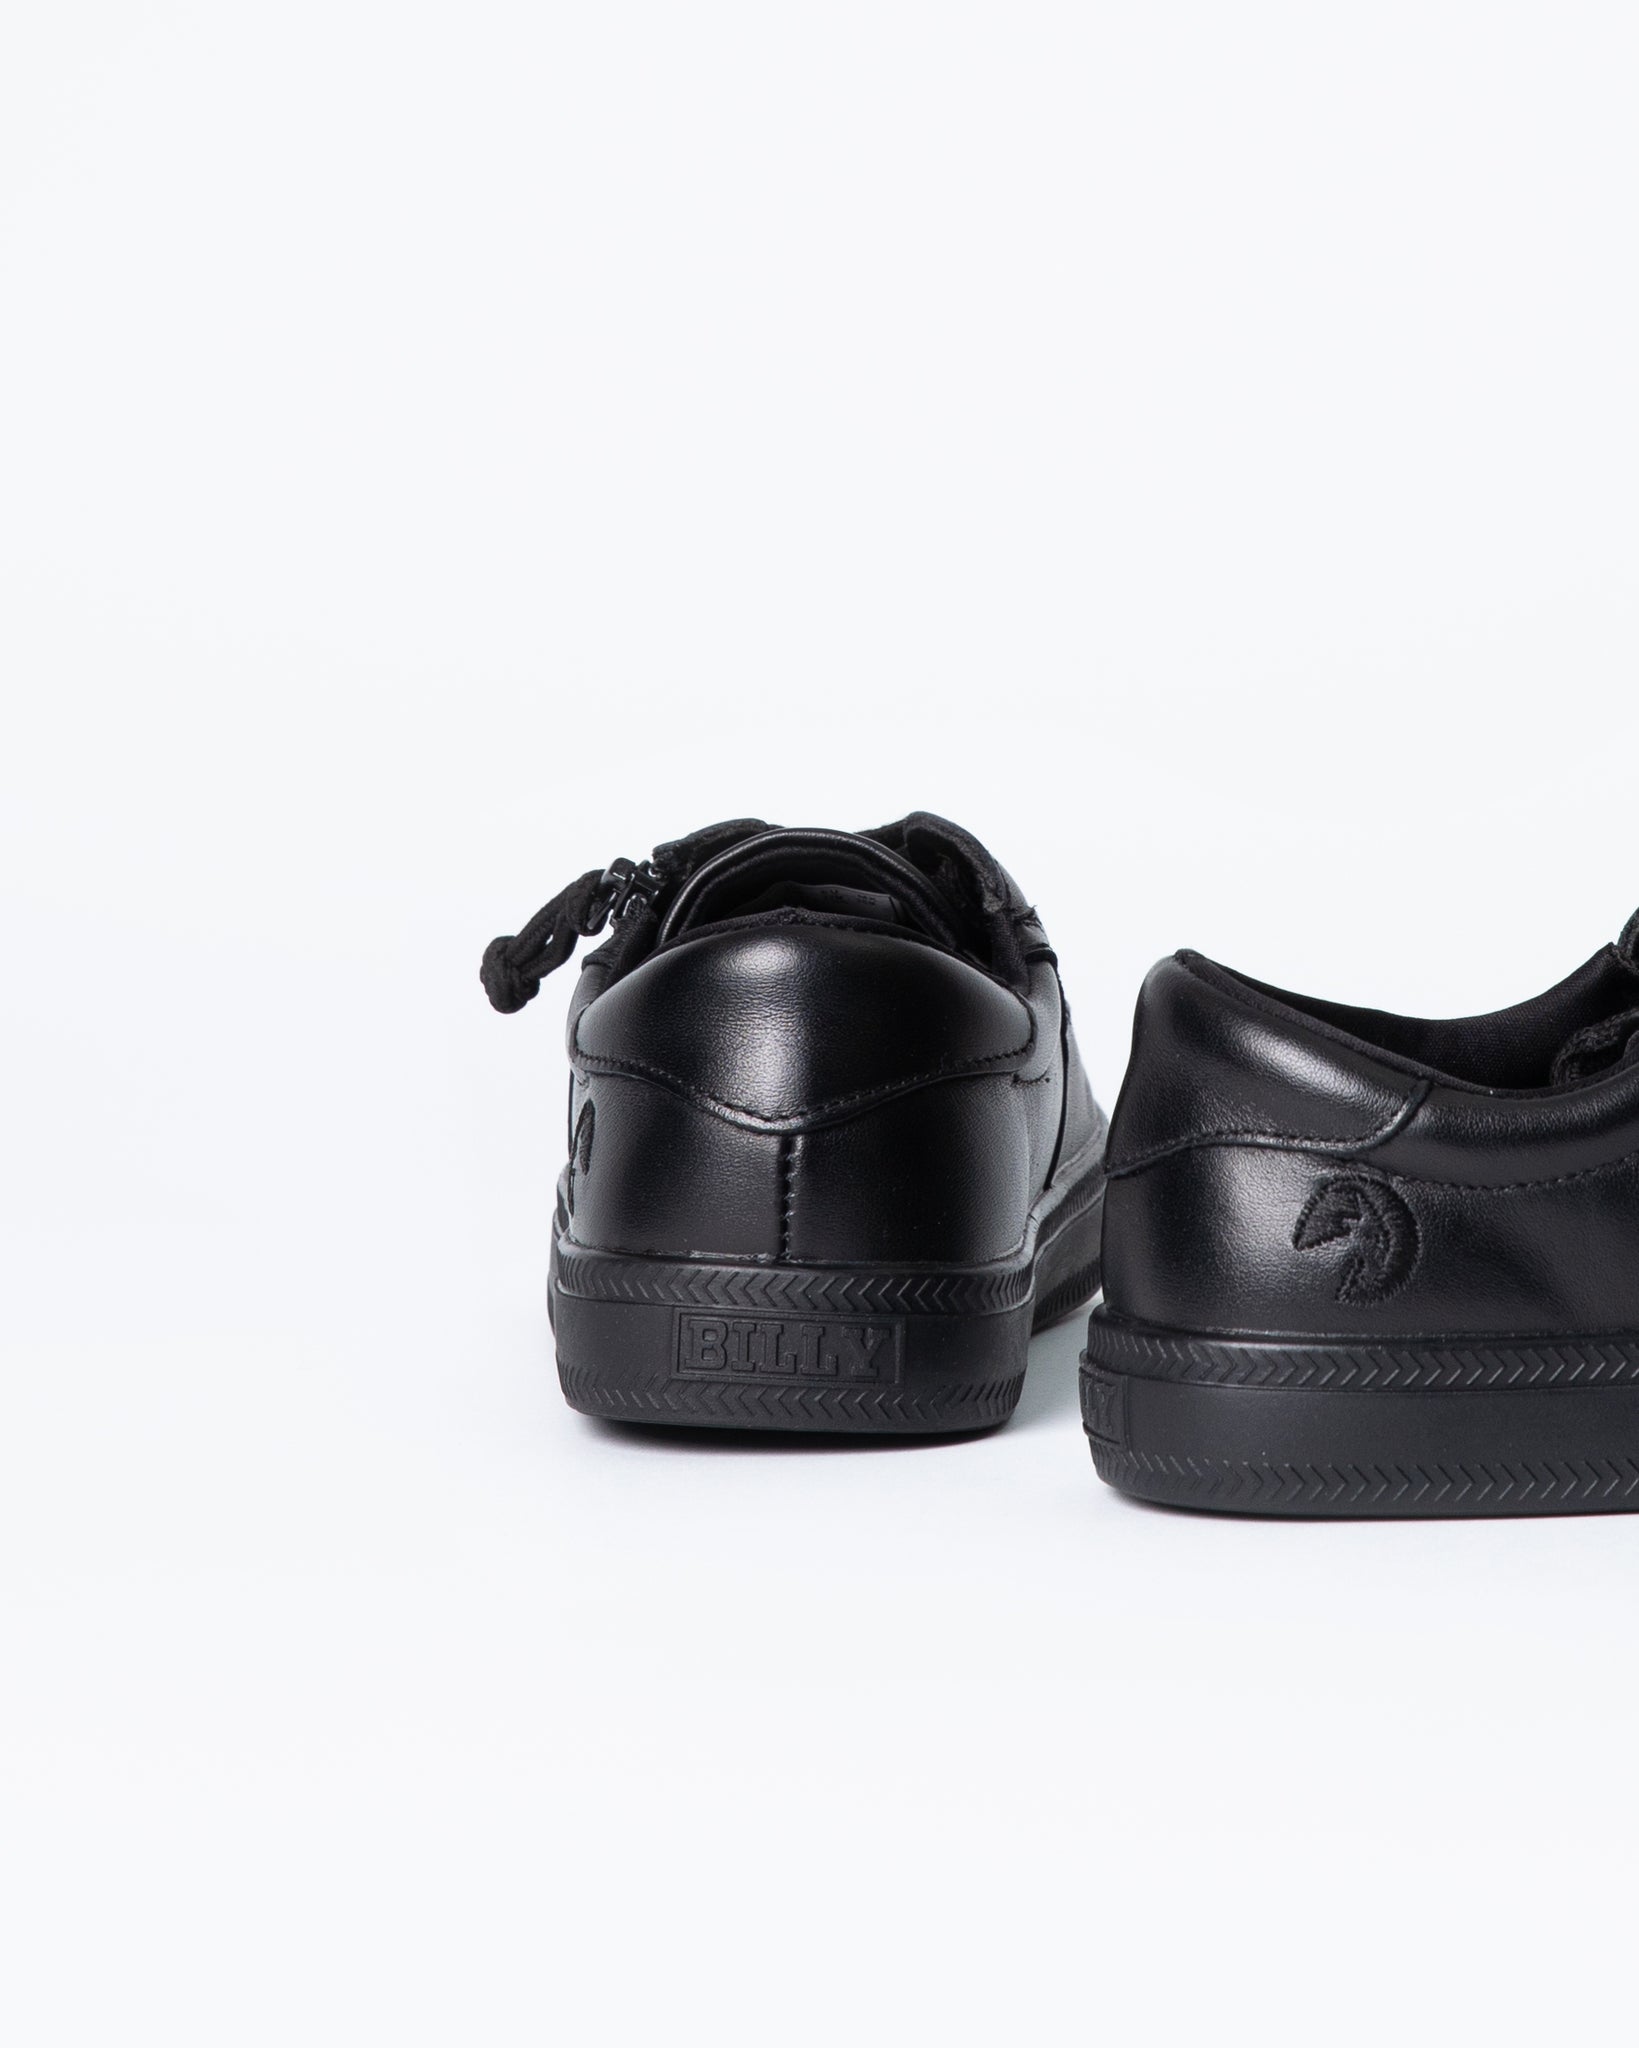 Low Rise Sneaker (Kids) - Black to the Floor Leather